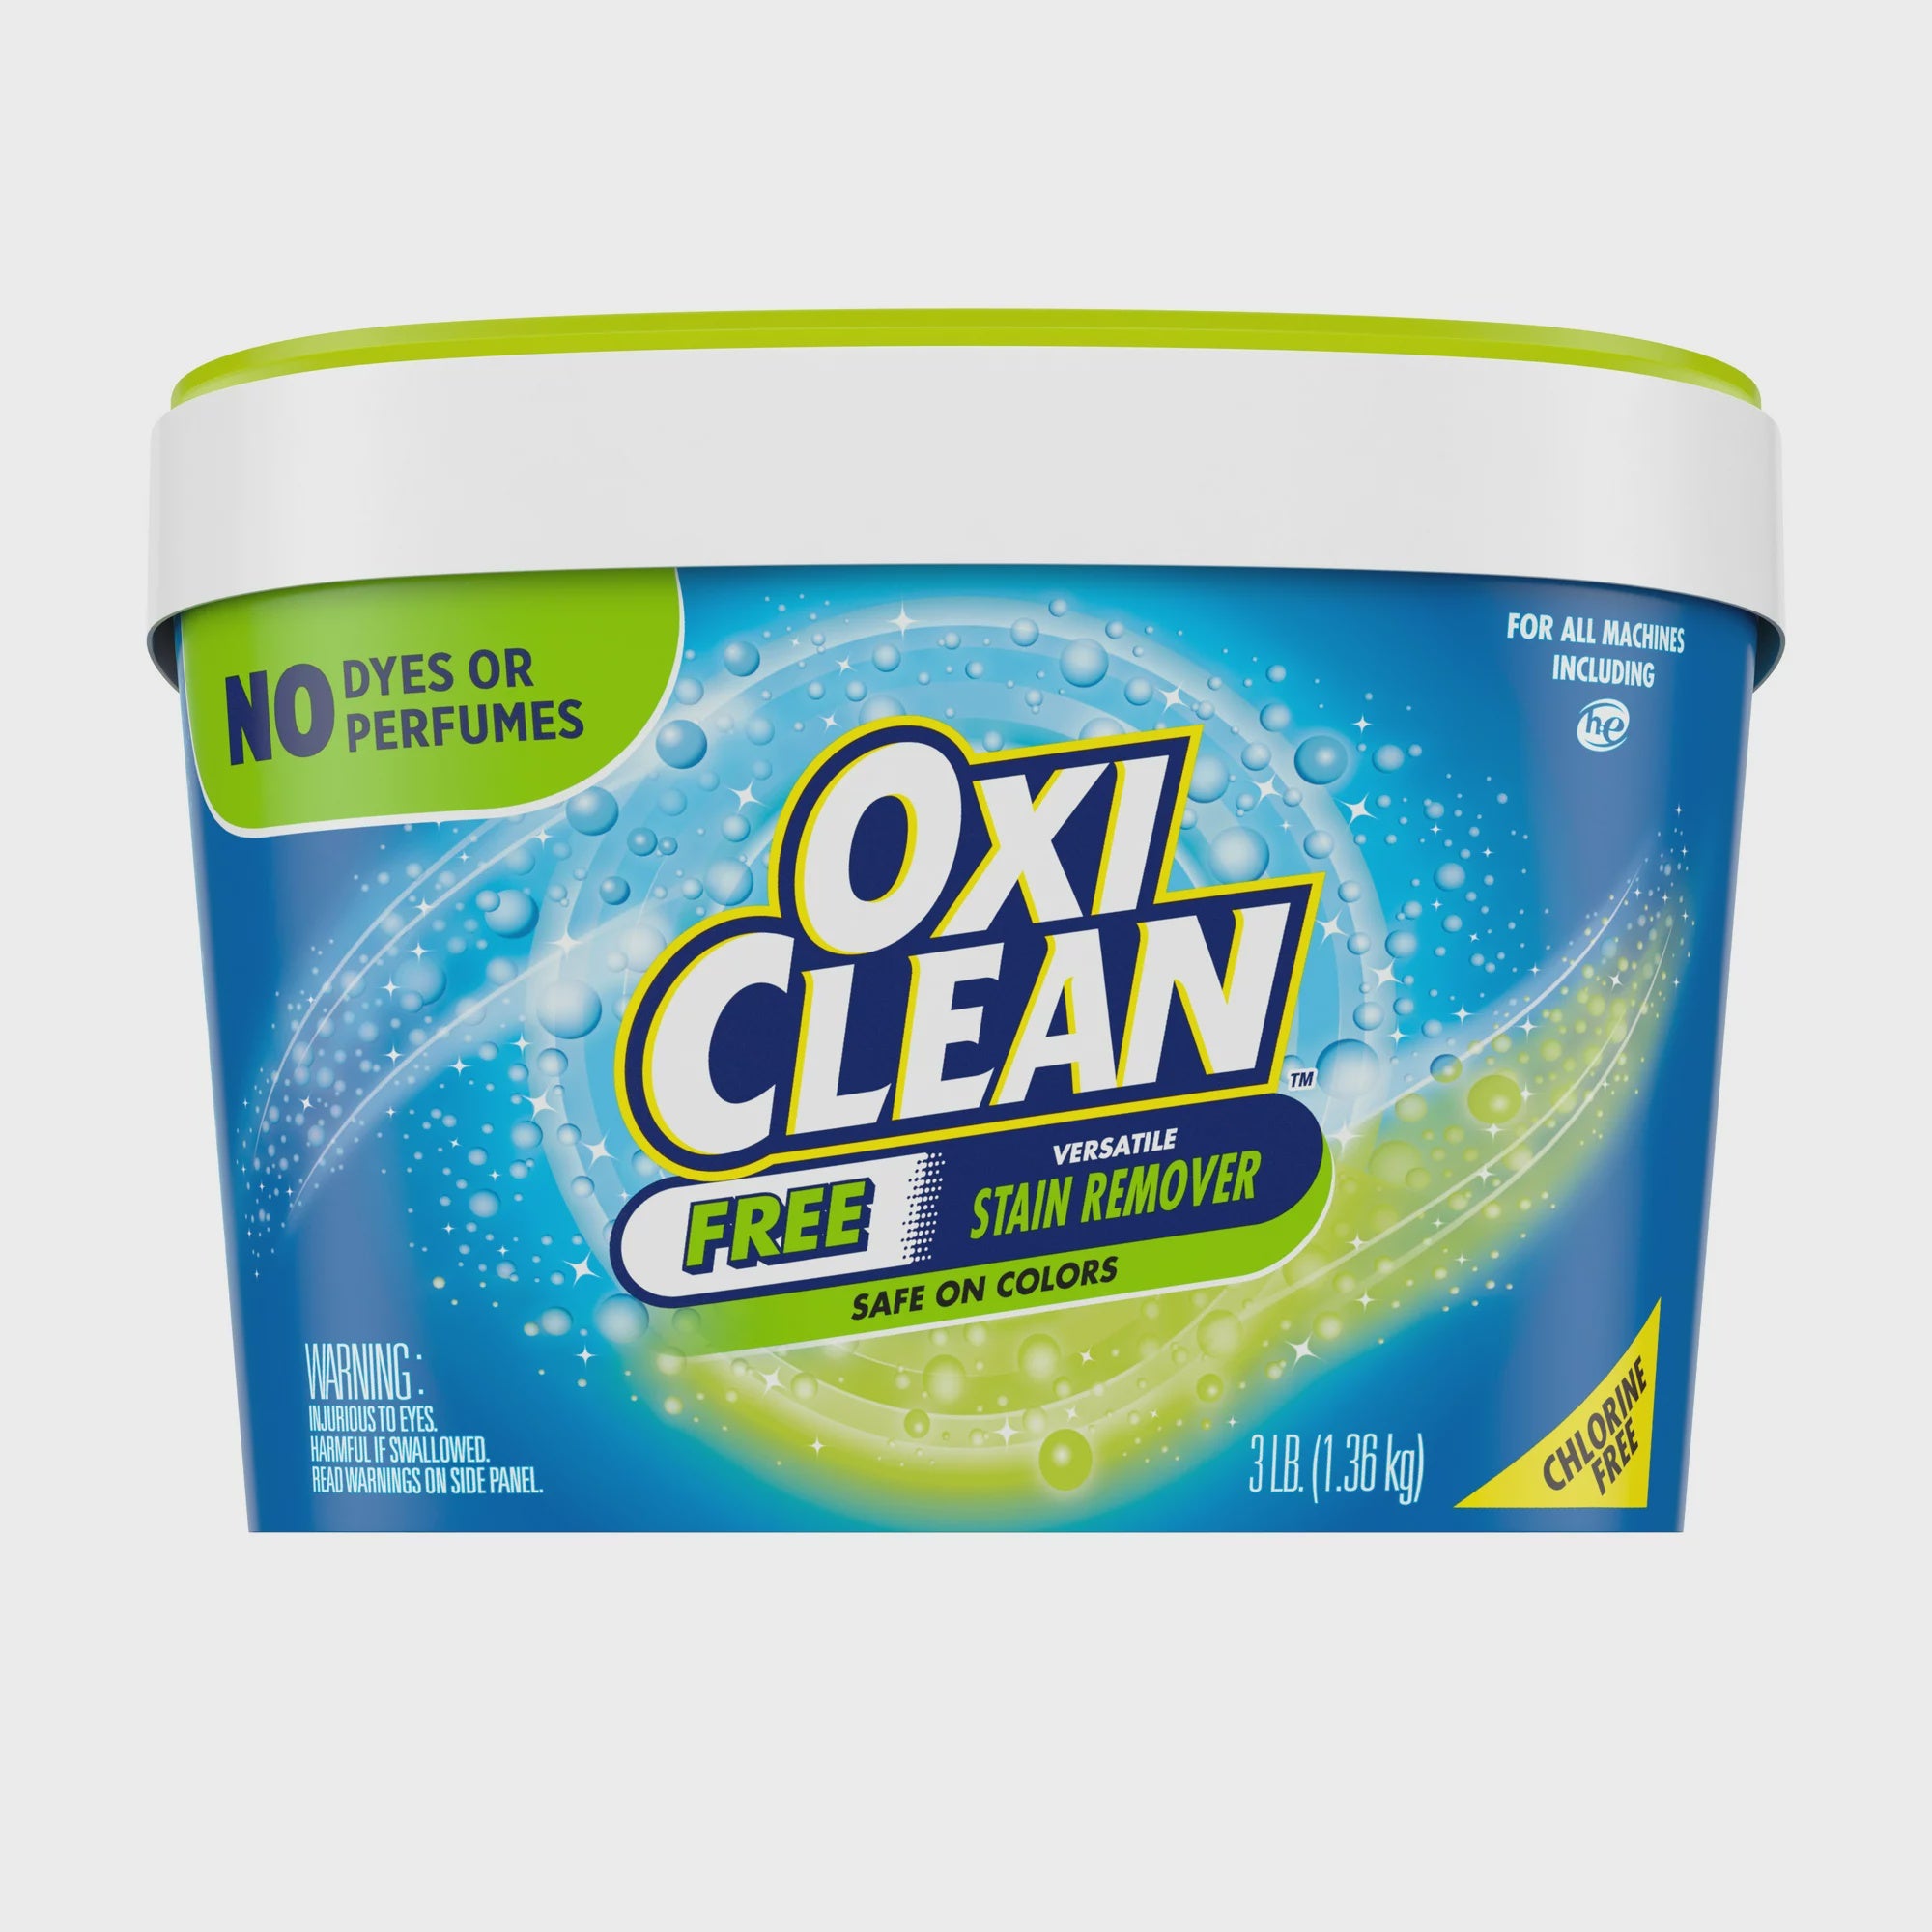 OxiClean Versatile Stain Remover Powder Free, Laundry Stain Remover, 3 Lbs